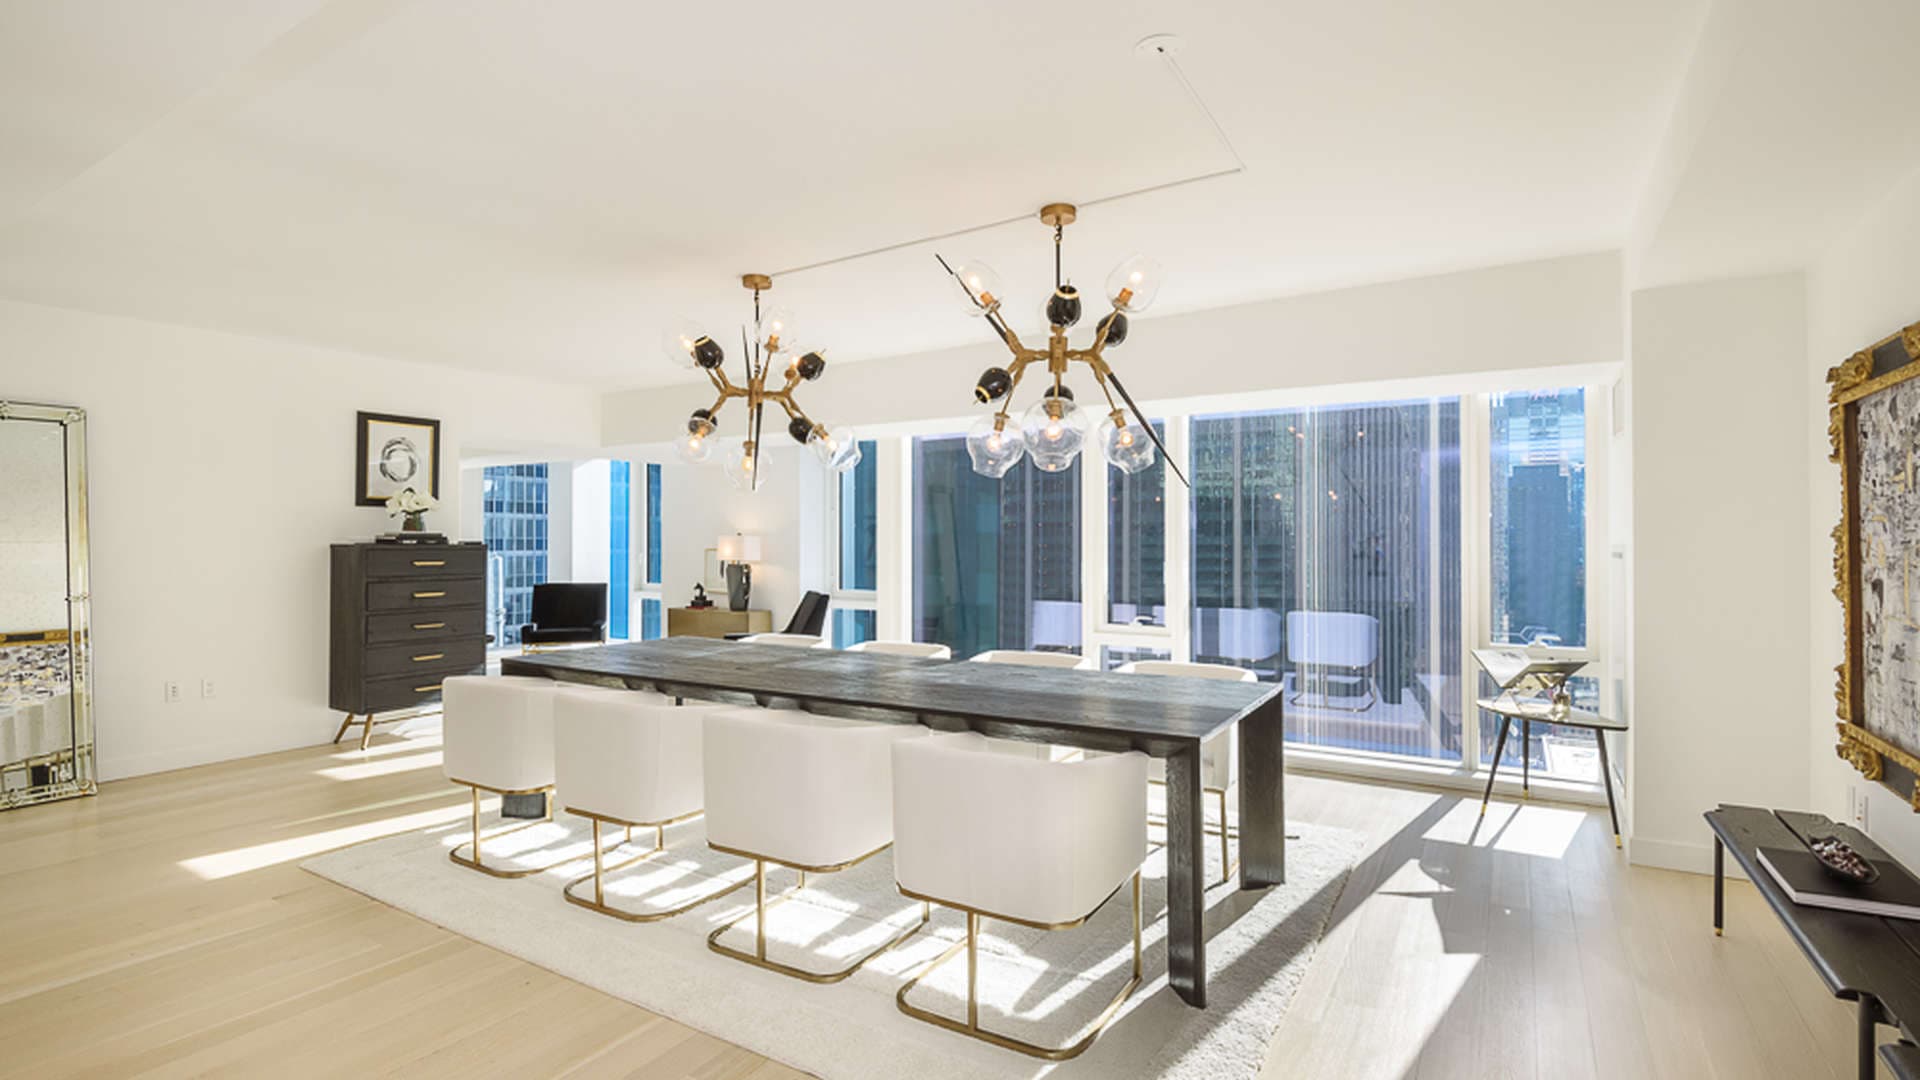 4 Bedroom Apartment For Sale 135 West 52nd Street Lp02592 19677f986e41b800.jpg